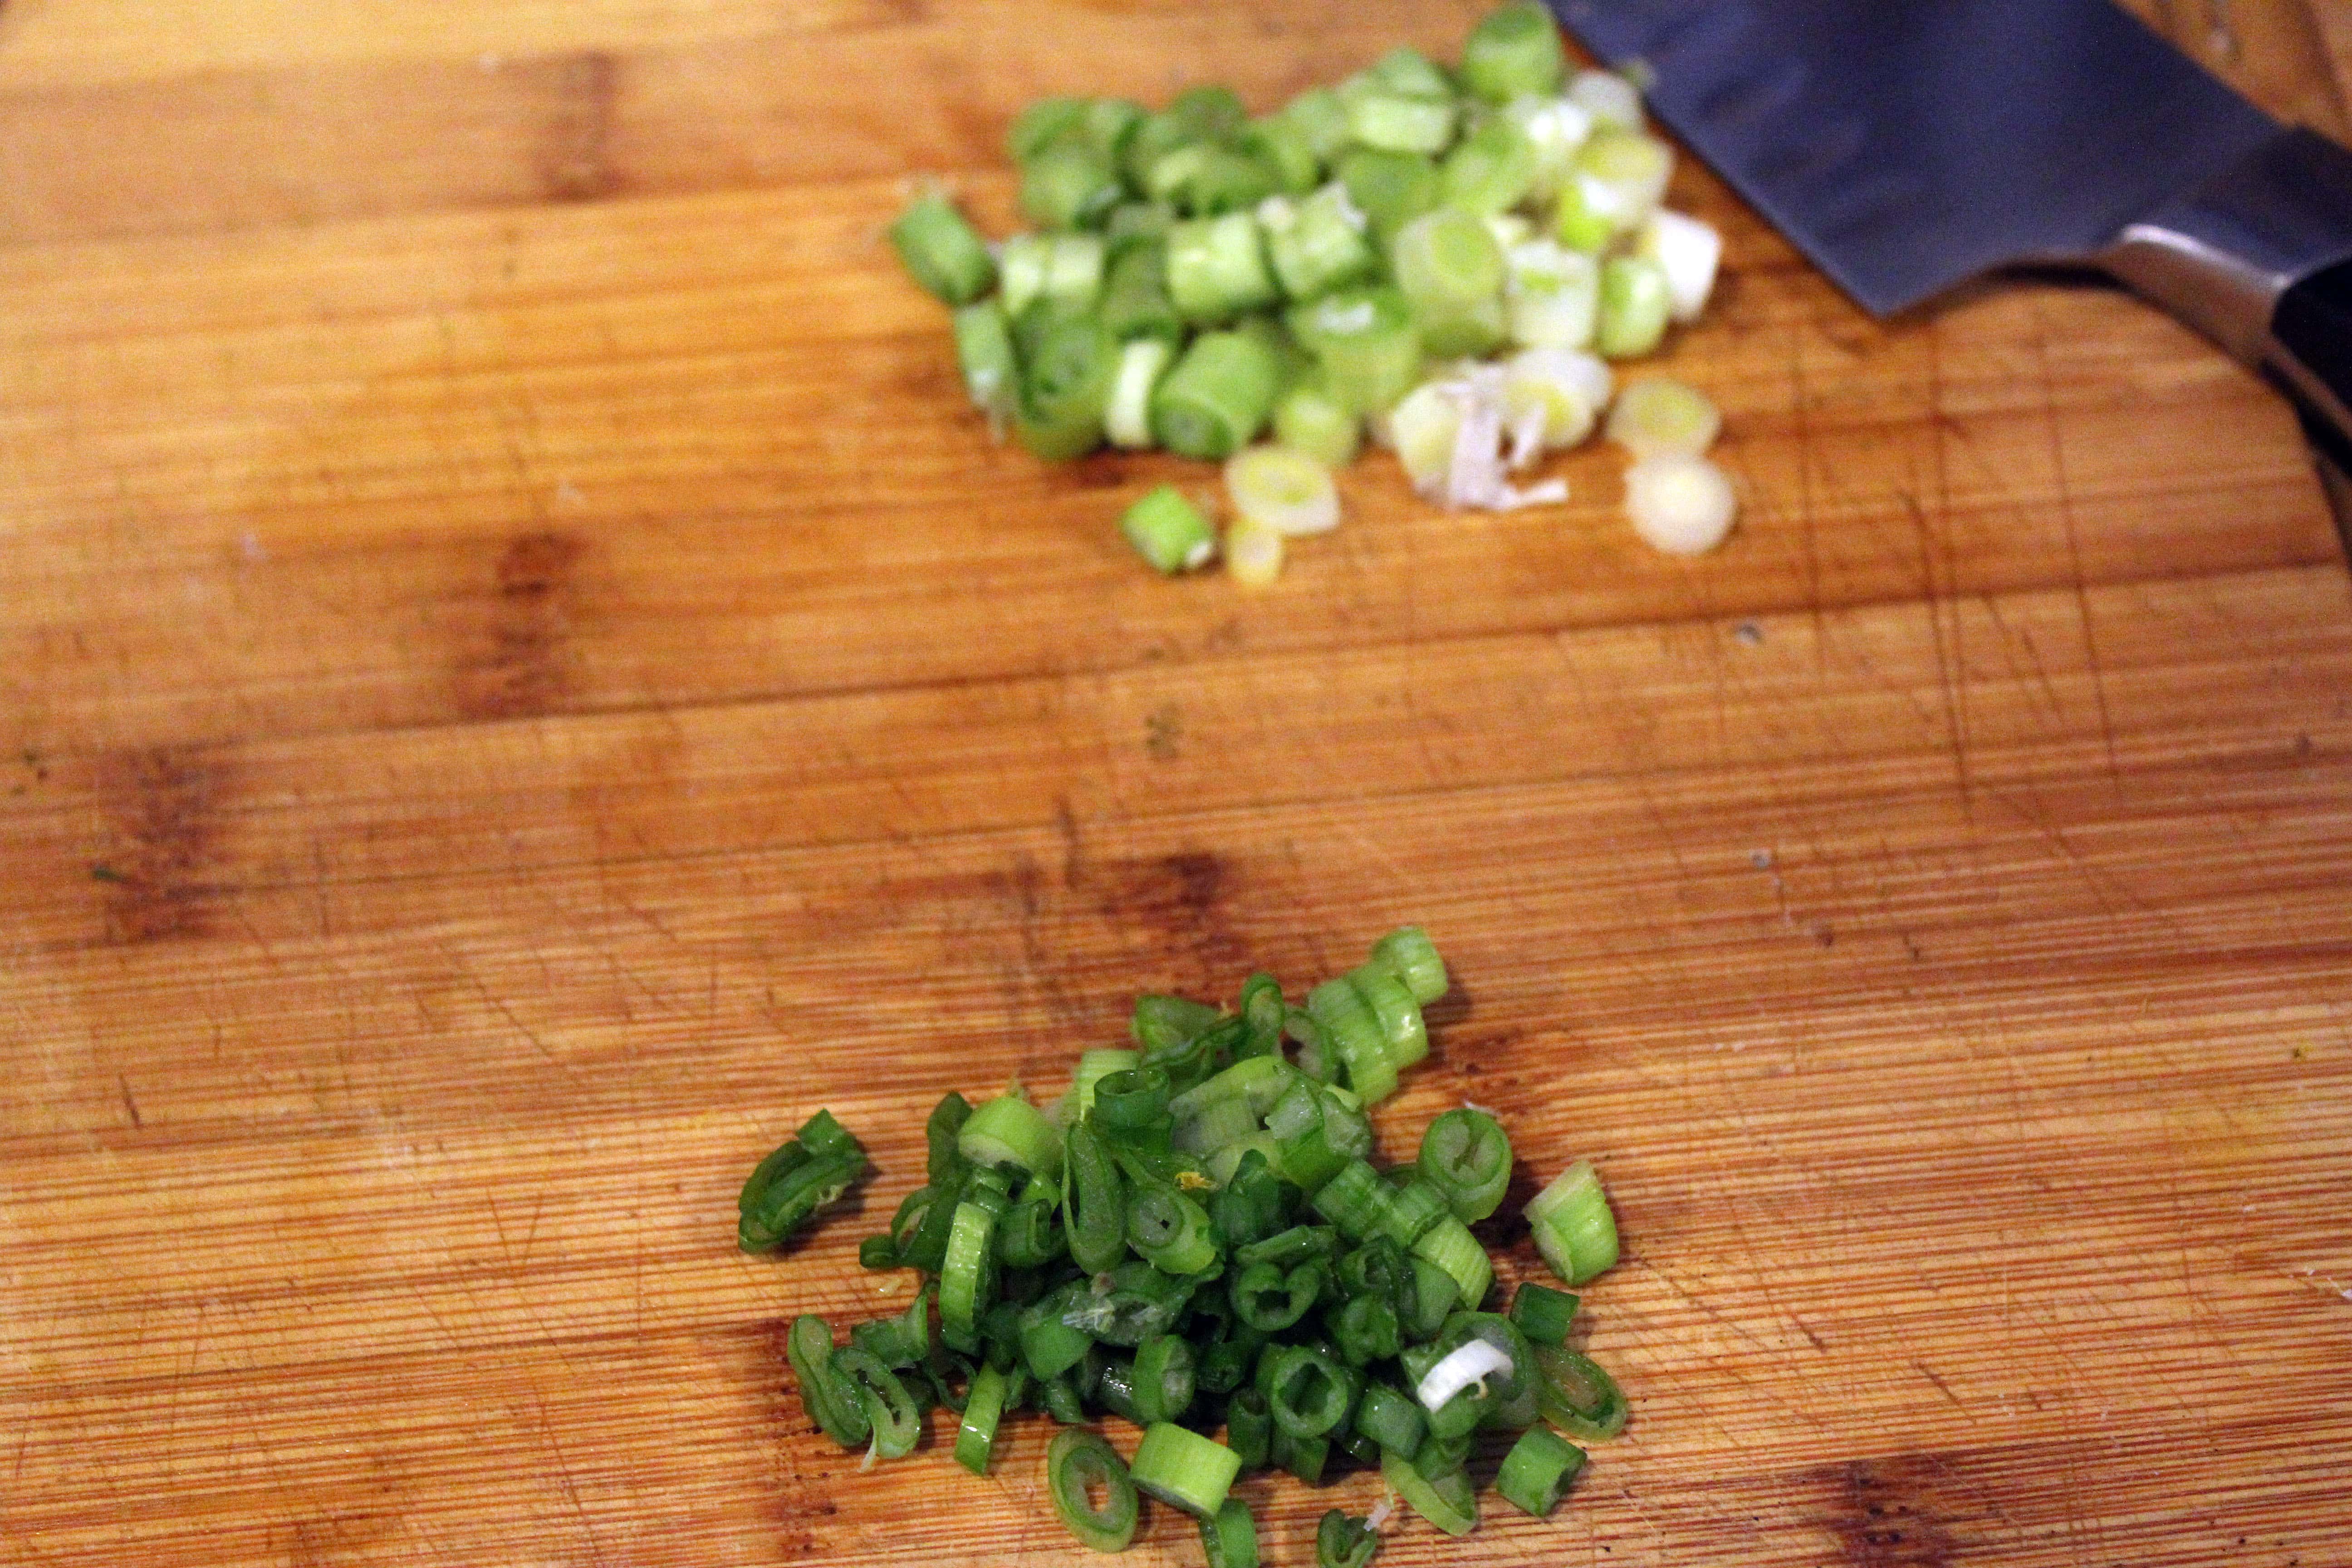 Chop and separate scallions